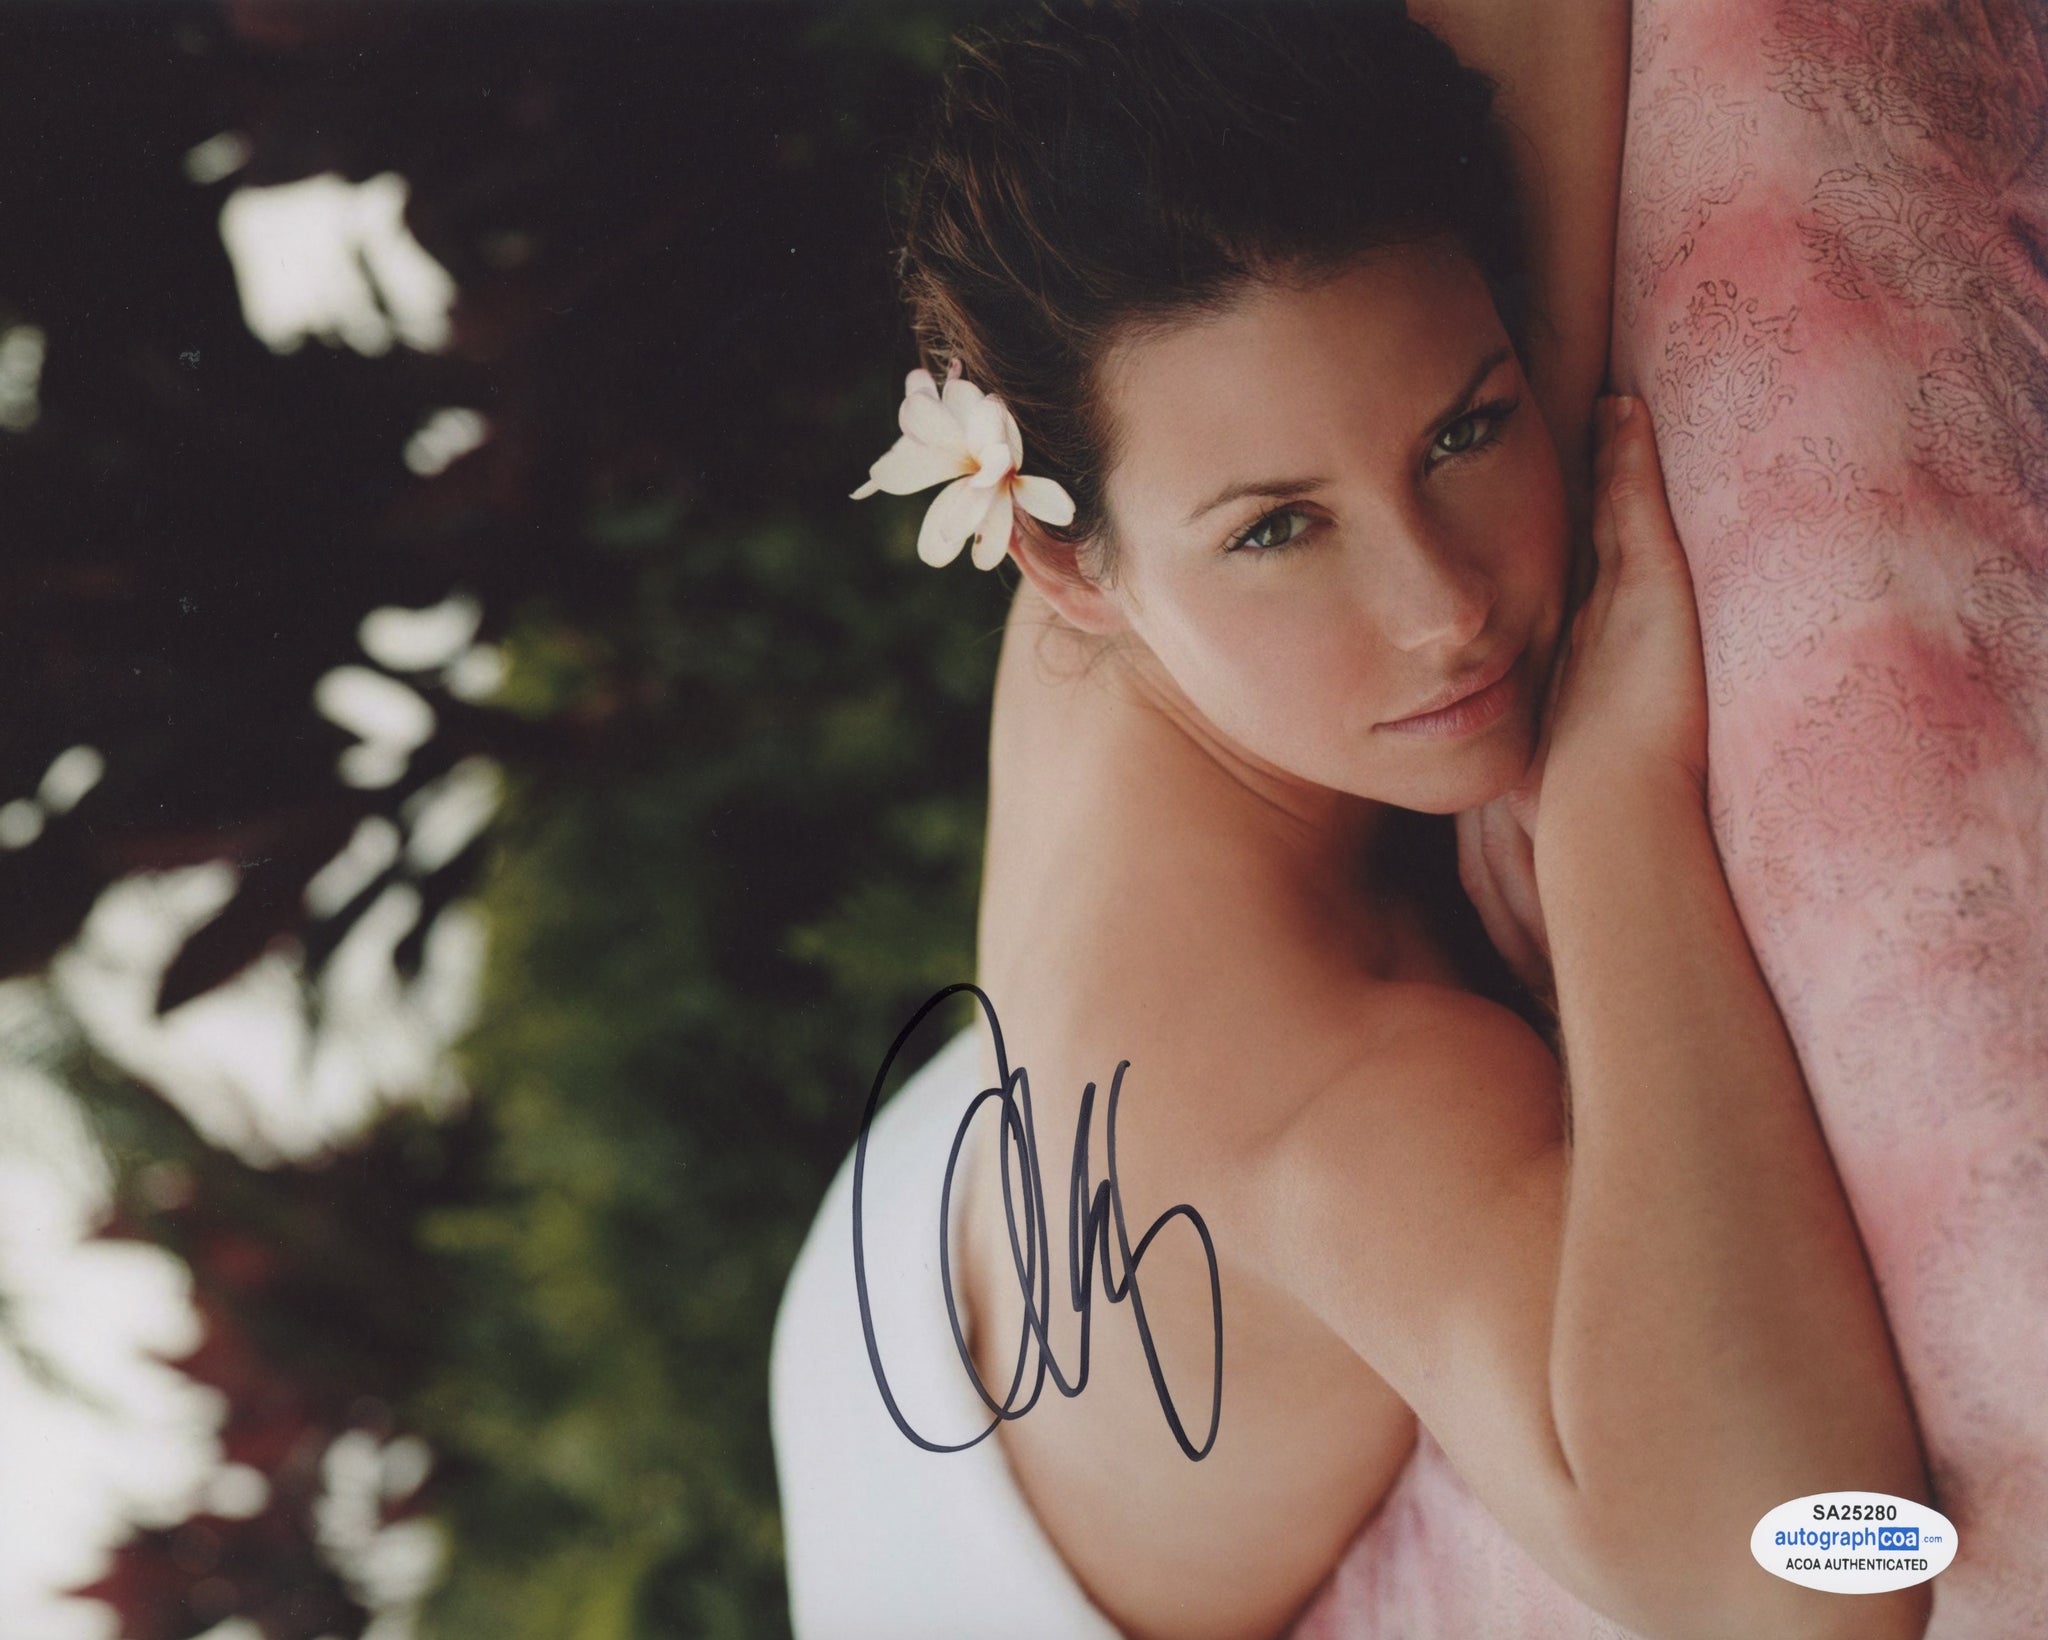 Evangeline Lilly Sexy Signed Autograph 8x10 Photo #11 - Outlaw Hobbies Authentic Autographs